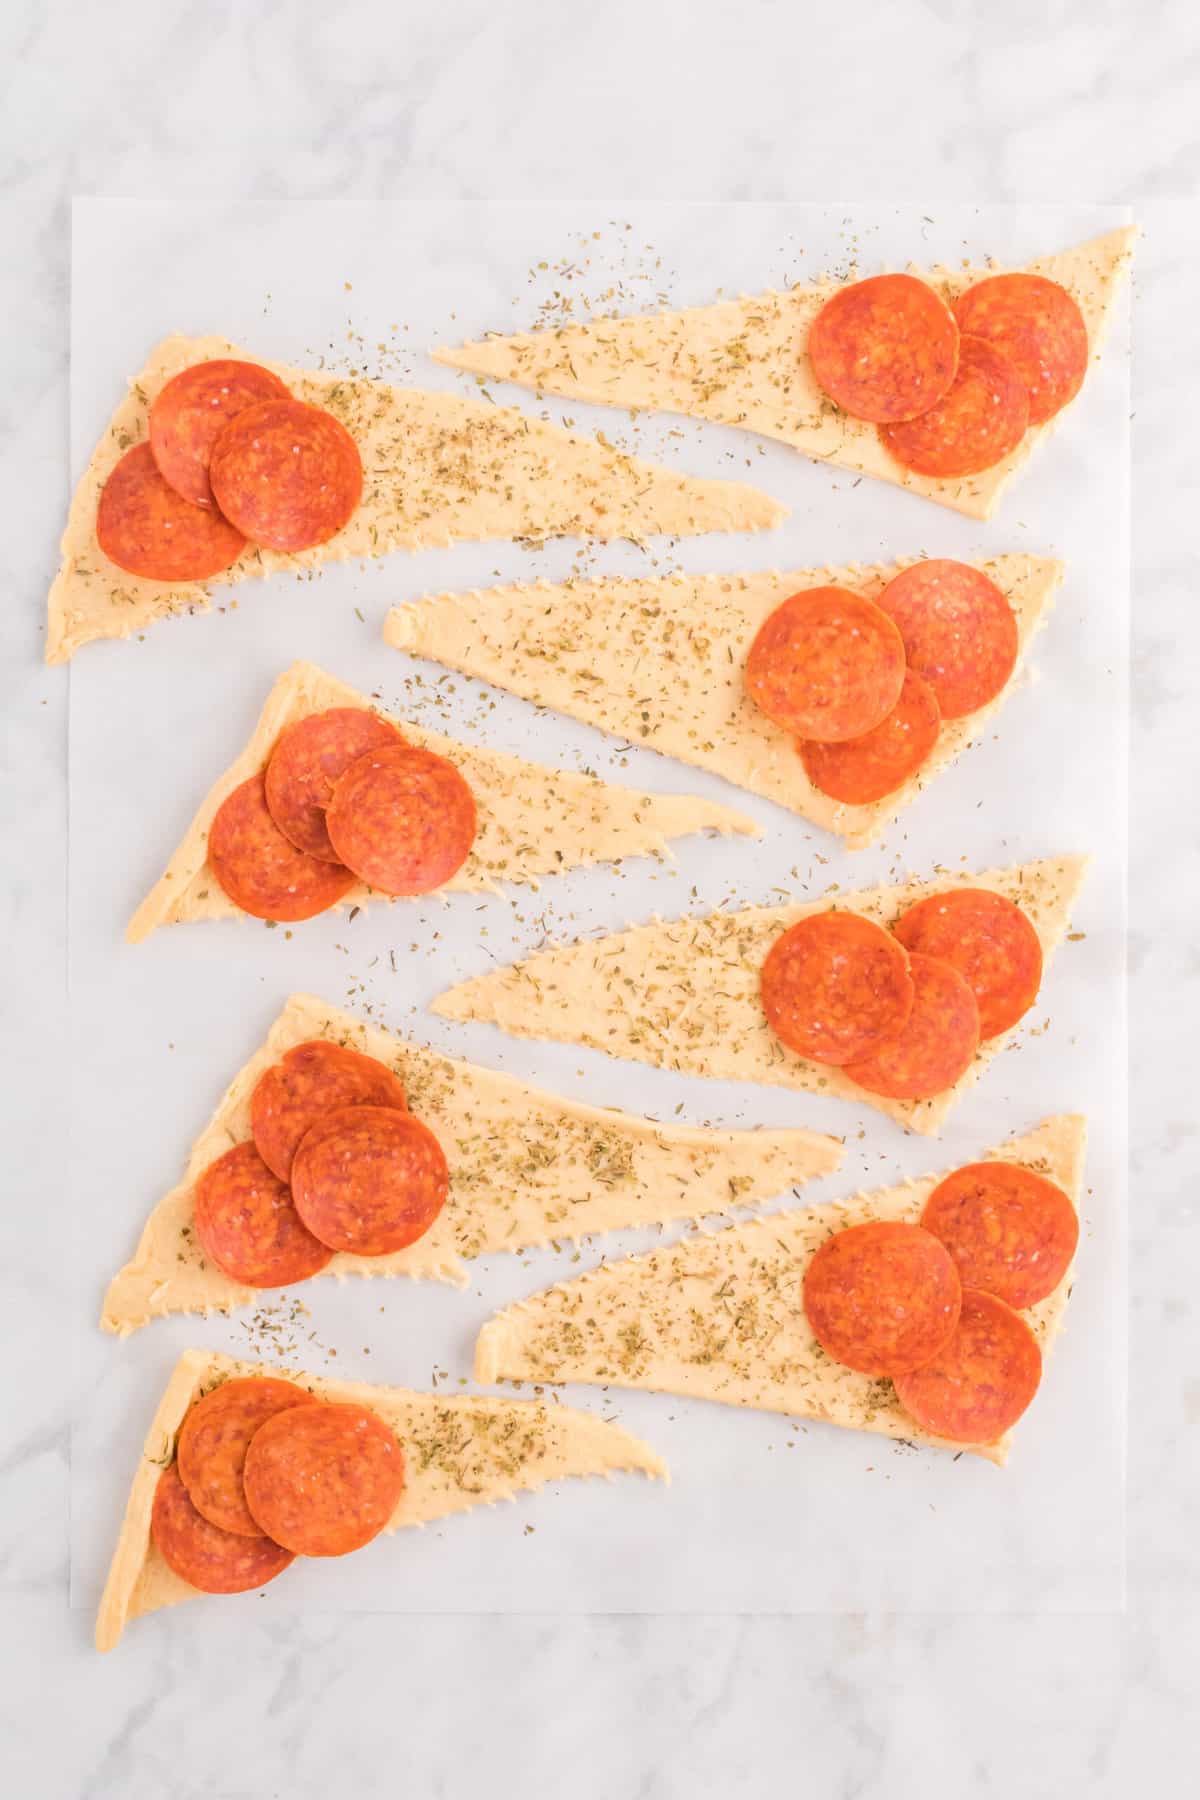 on the Widest part of the Crescent Rolls add three pieces of pepperoni.